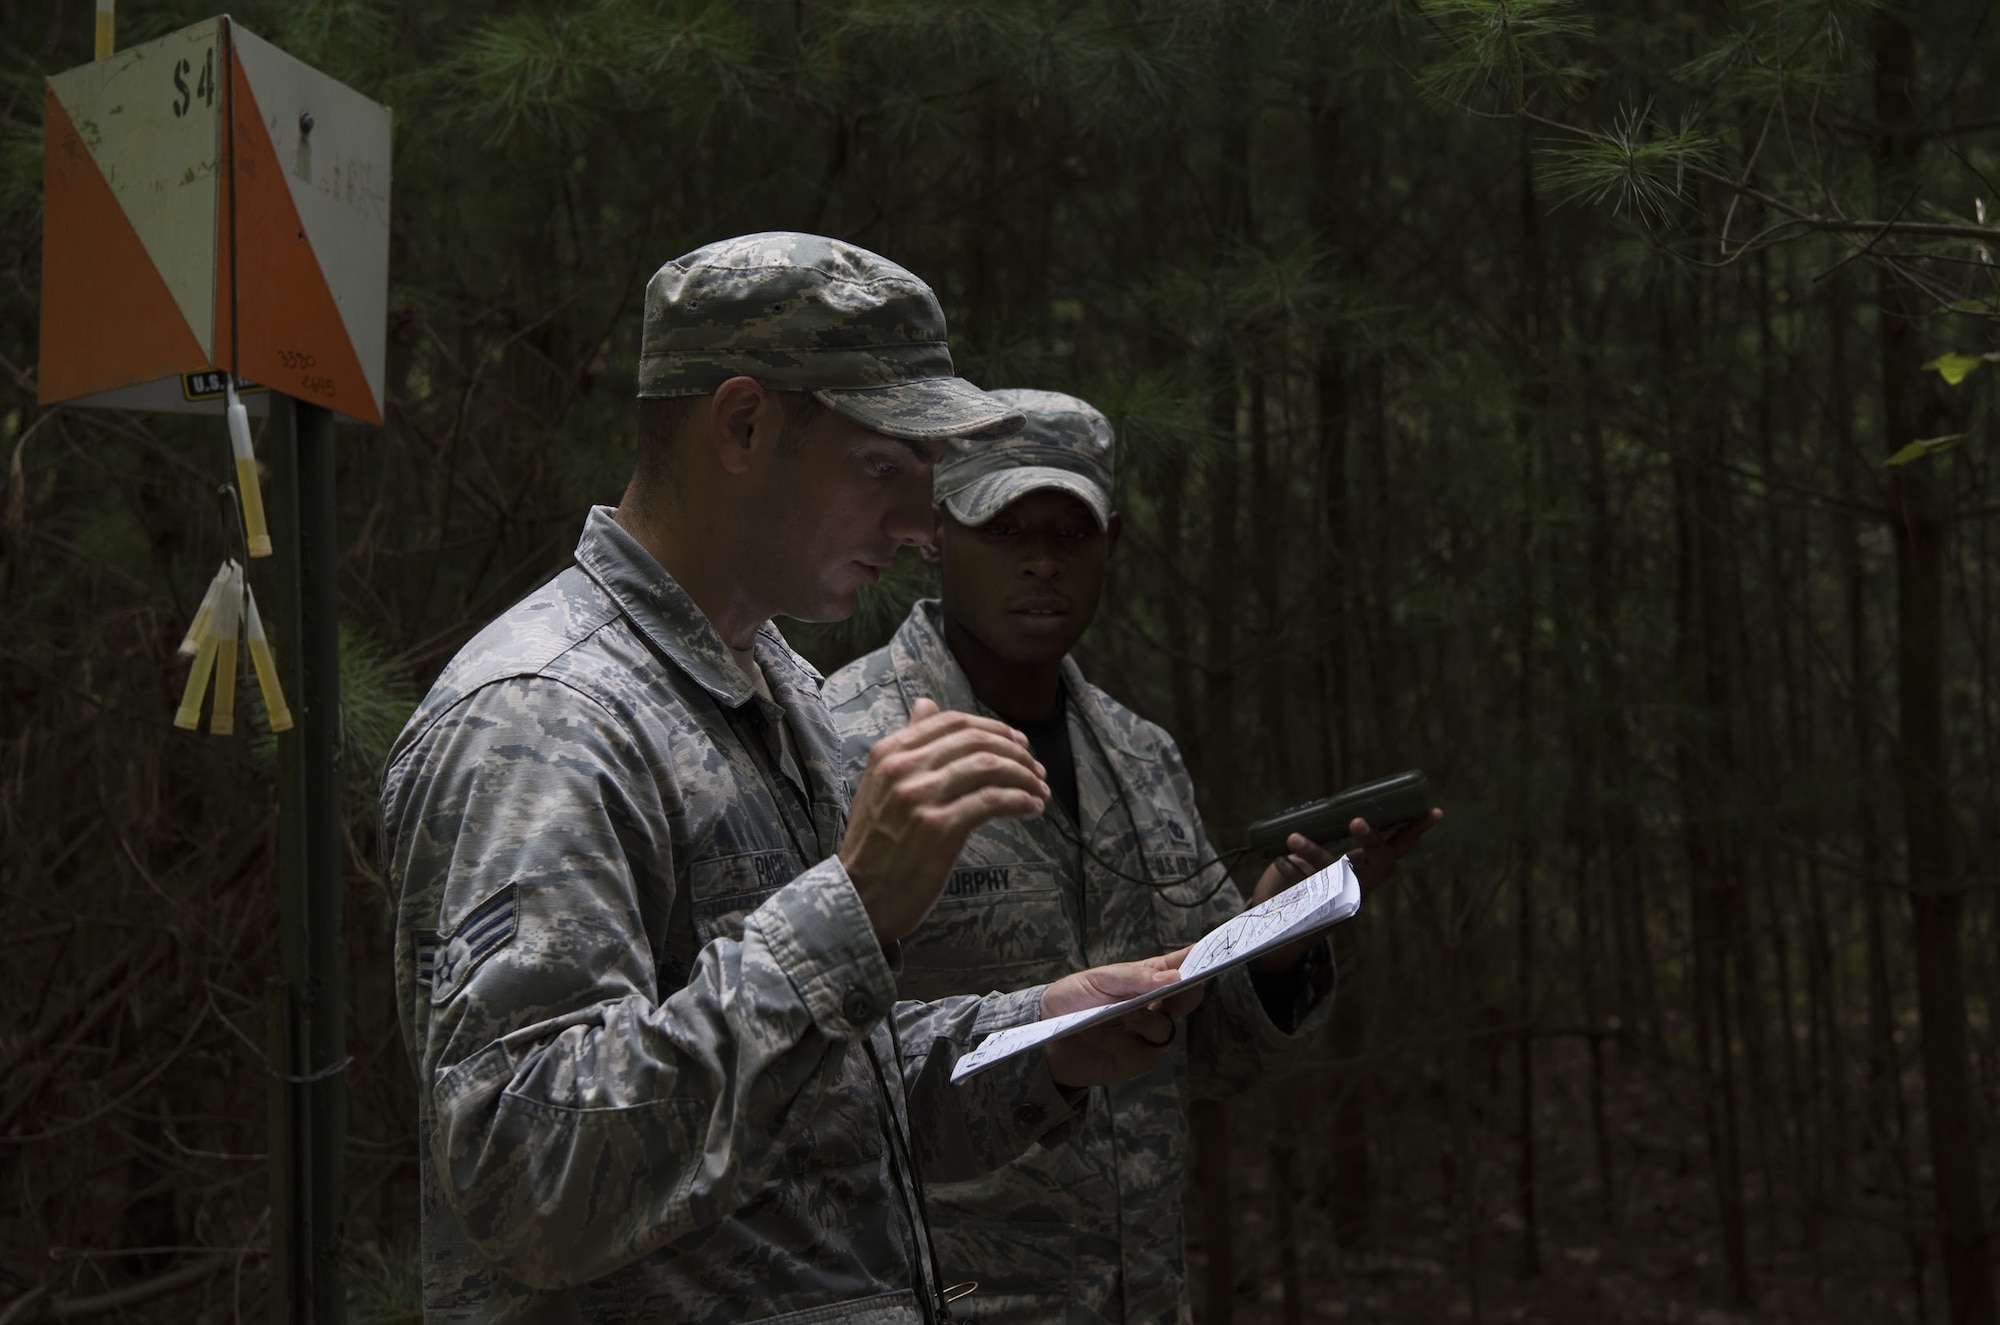 Senior Airman Joseph Pace, Fairchild Air Force Base, Washington, 92nd Security Forces Squadron installation patrolman, and U.S. Air Force Staff Sgt. Bryan Murphy, Joint Base McGuire-Dix-Lakehurst, New Jersey, 421st Combat Training Squadron Phoenix Raven instructor, navigate the woods using a map and GPS during land navigation training on Joint Base McGuire-Dix-Lakehurst, New Jersey, in preparation for representing Air Mobility Command in the 2018 Air Force Defender Challenge Sept. 7, 2018. Teams were instructed to find specific marked points using only a map and GPS to find their way.